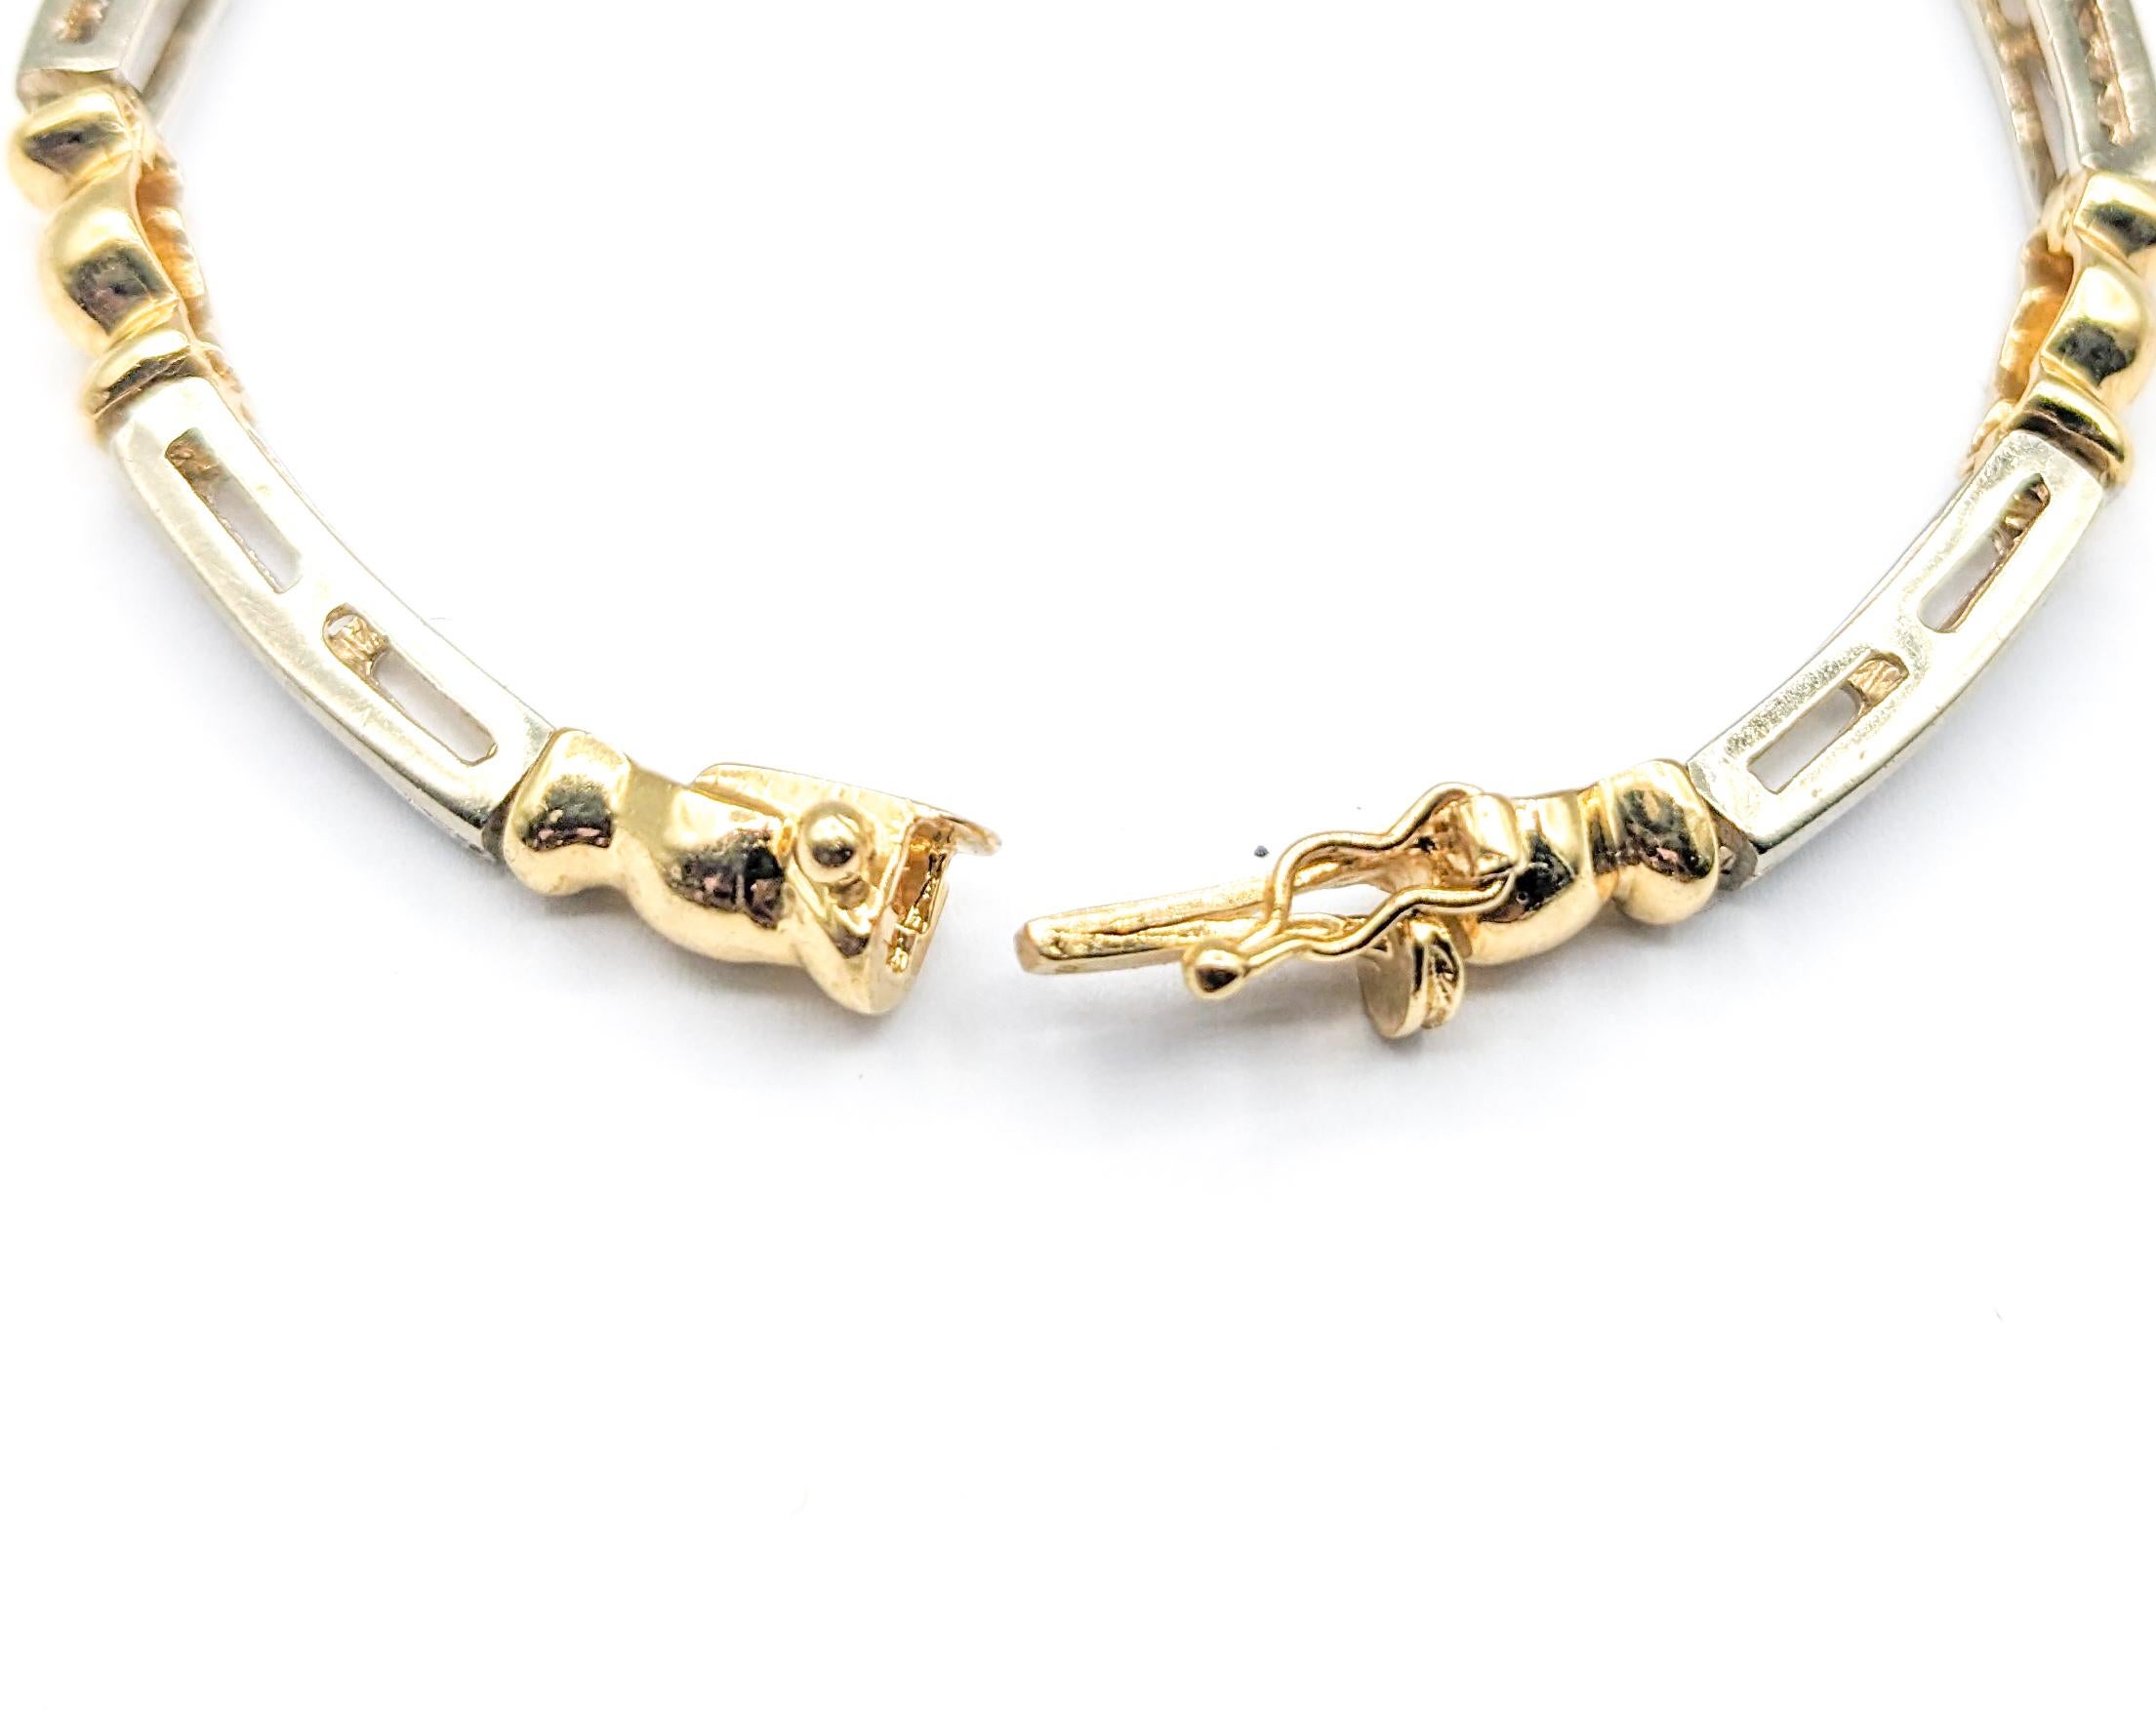 Unique Bar and Ball Design Bracelet In Two-Tone Gold

This stunning bracelet, finely crafted in 14kt two-tone gold, is adorned with 1.0ctw of diamonds that radiate a near colorless white hue with I clarity. The unique bar and ball design adds a